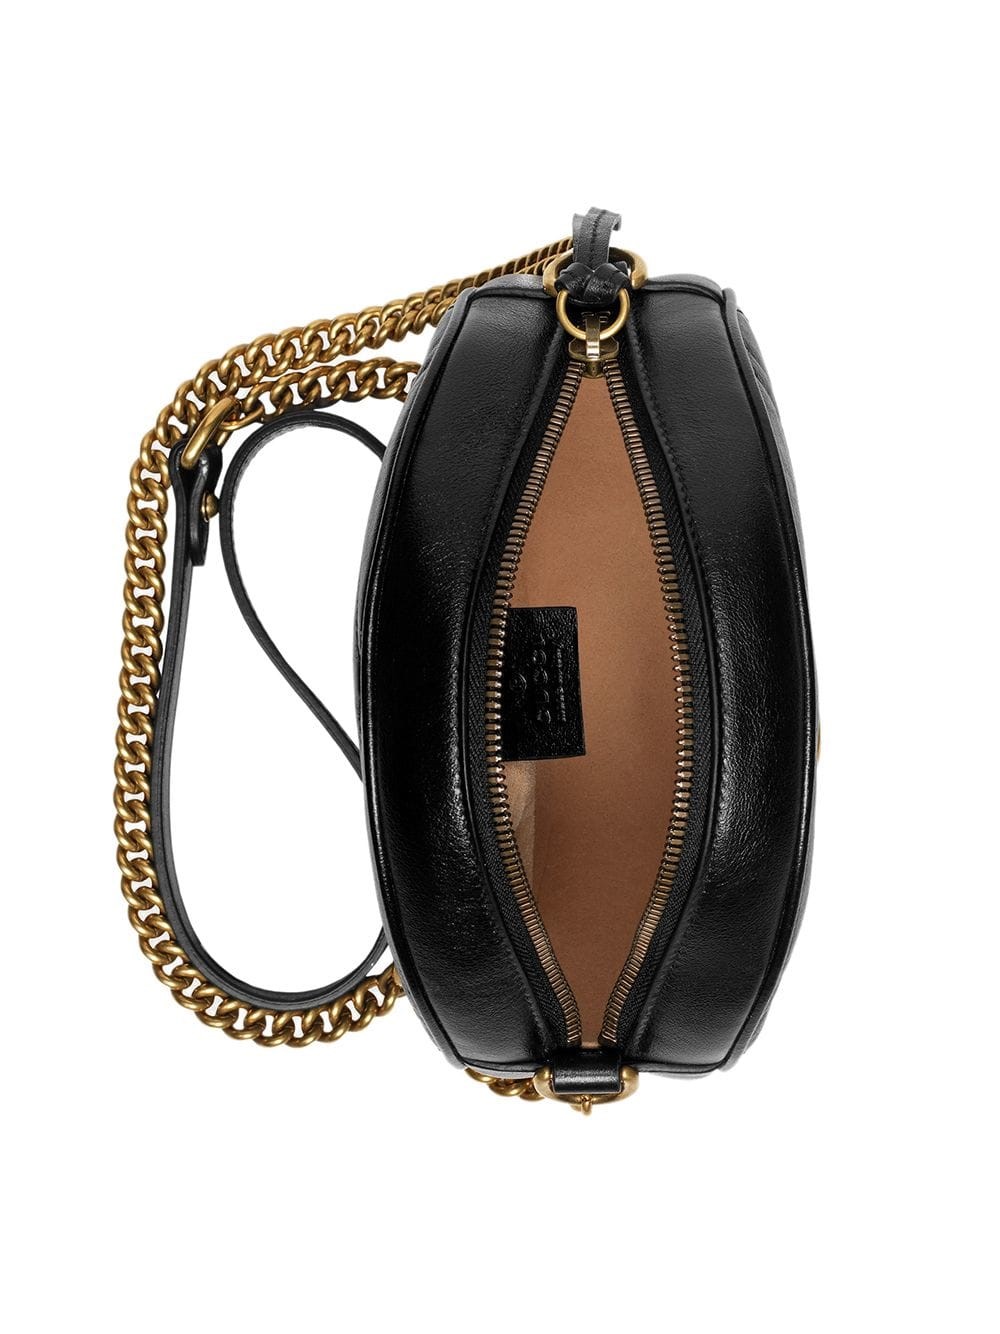 gucci GG MARMONT ROUND BAG available on literacybasics.ca - 27417